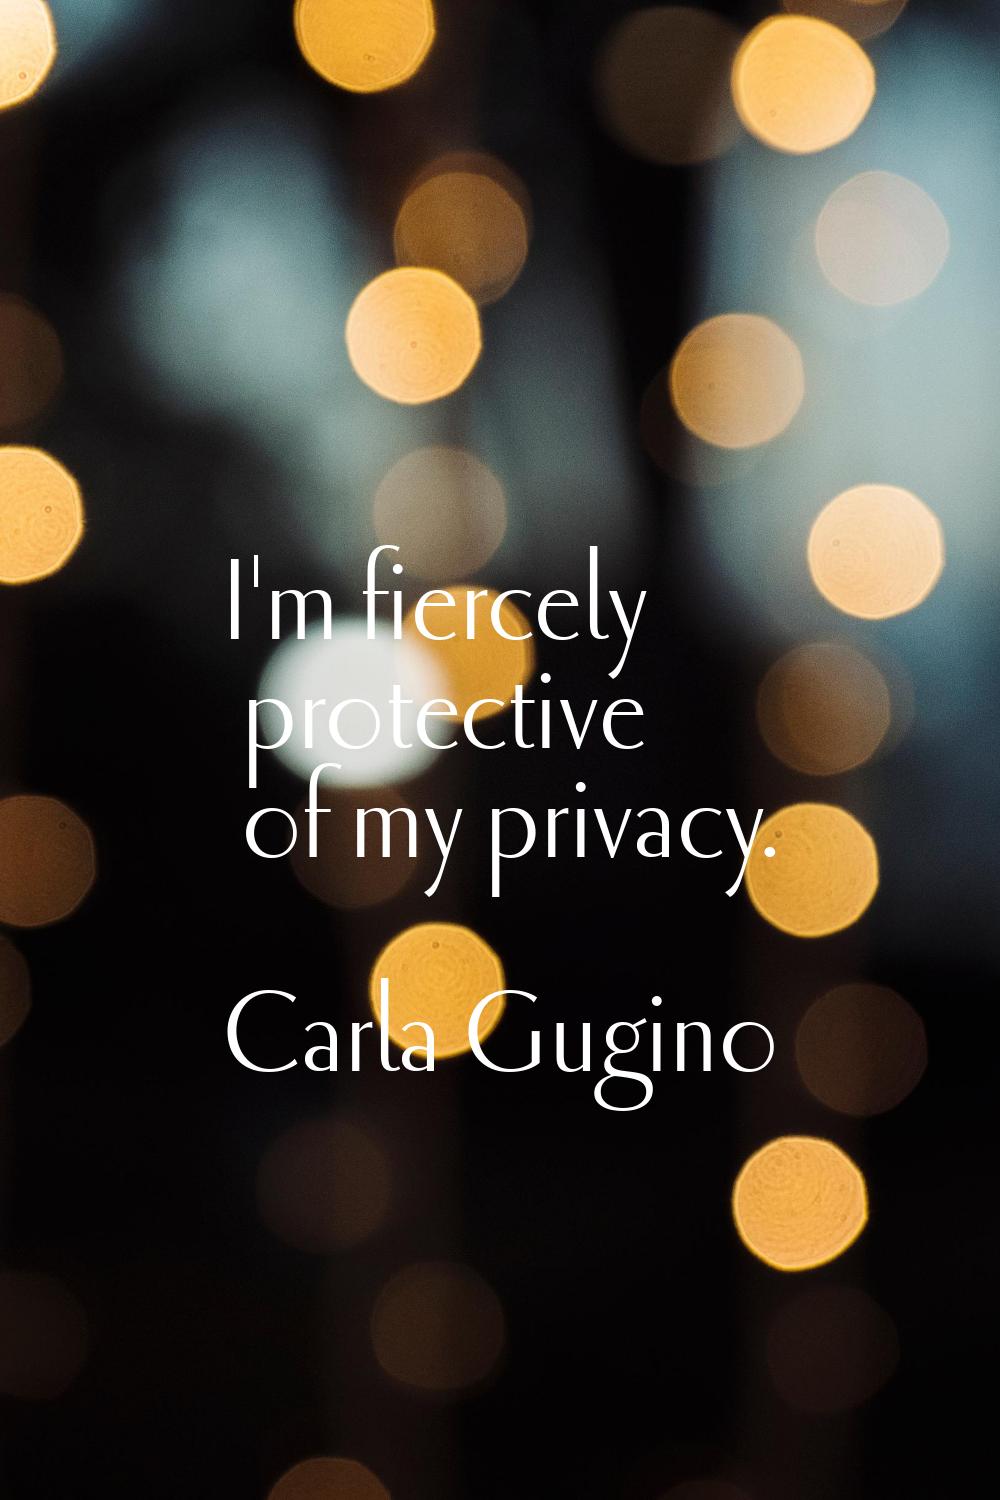 I'm fiercely protective of my privacy.